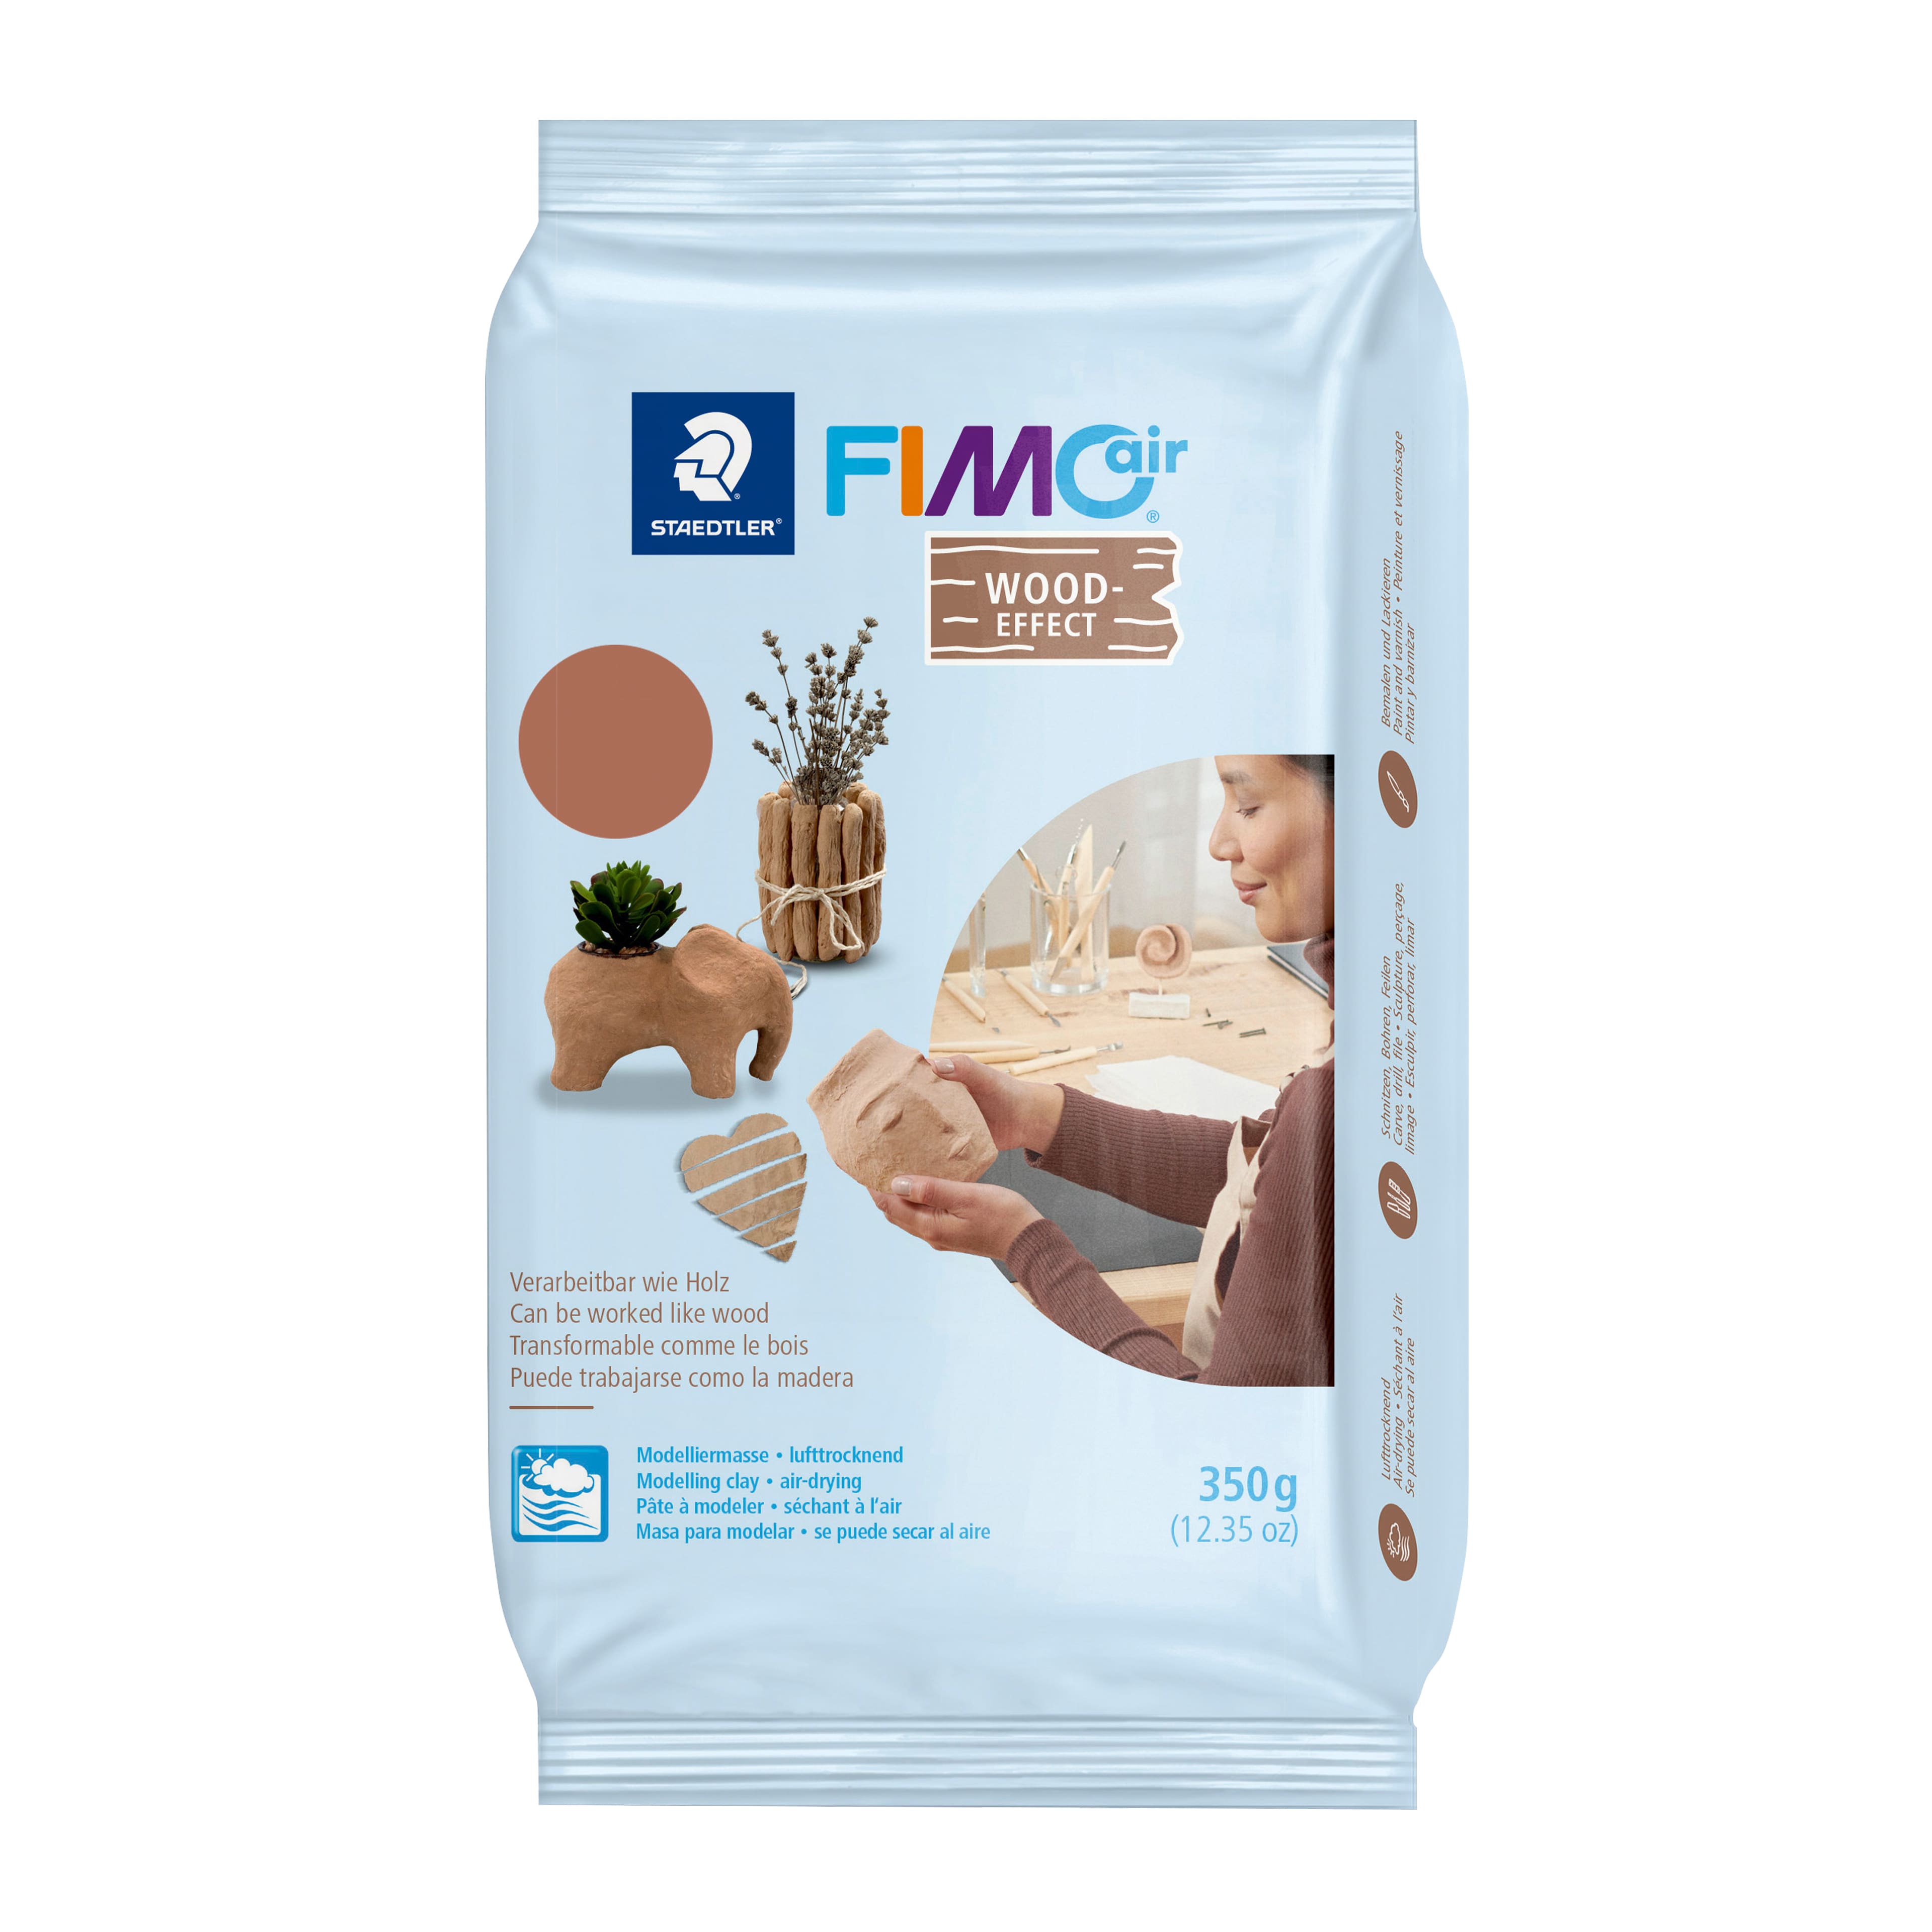 FIMO® Air 12.3oz. Wood-Effect Air-Dry Modeling Clay